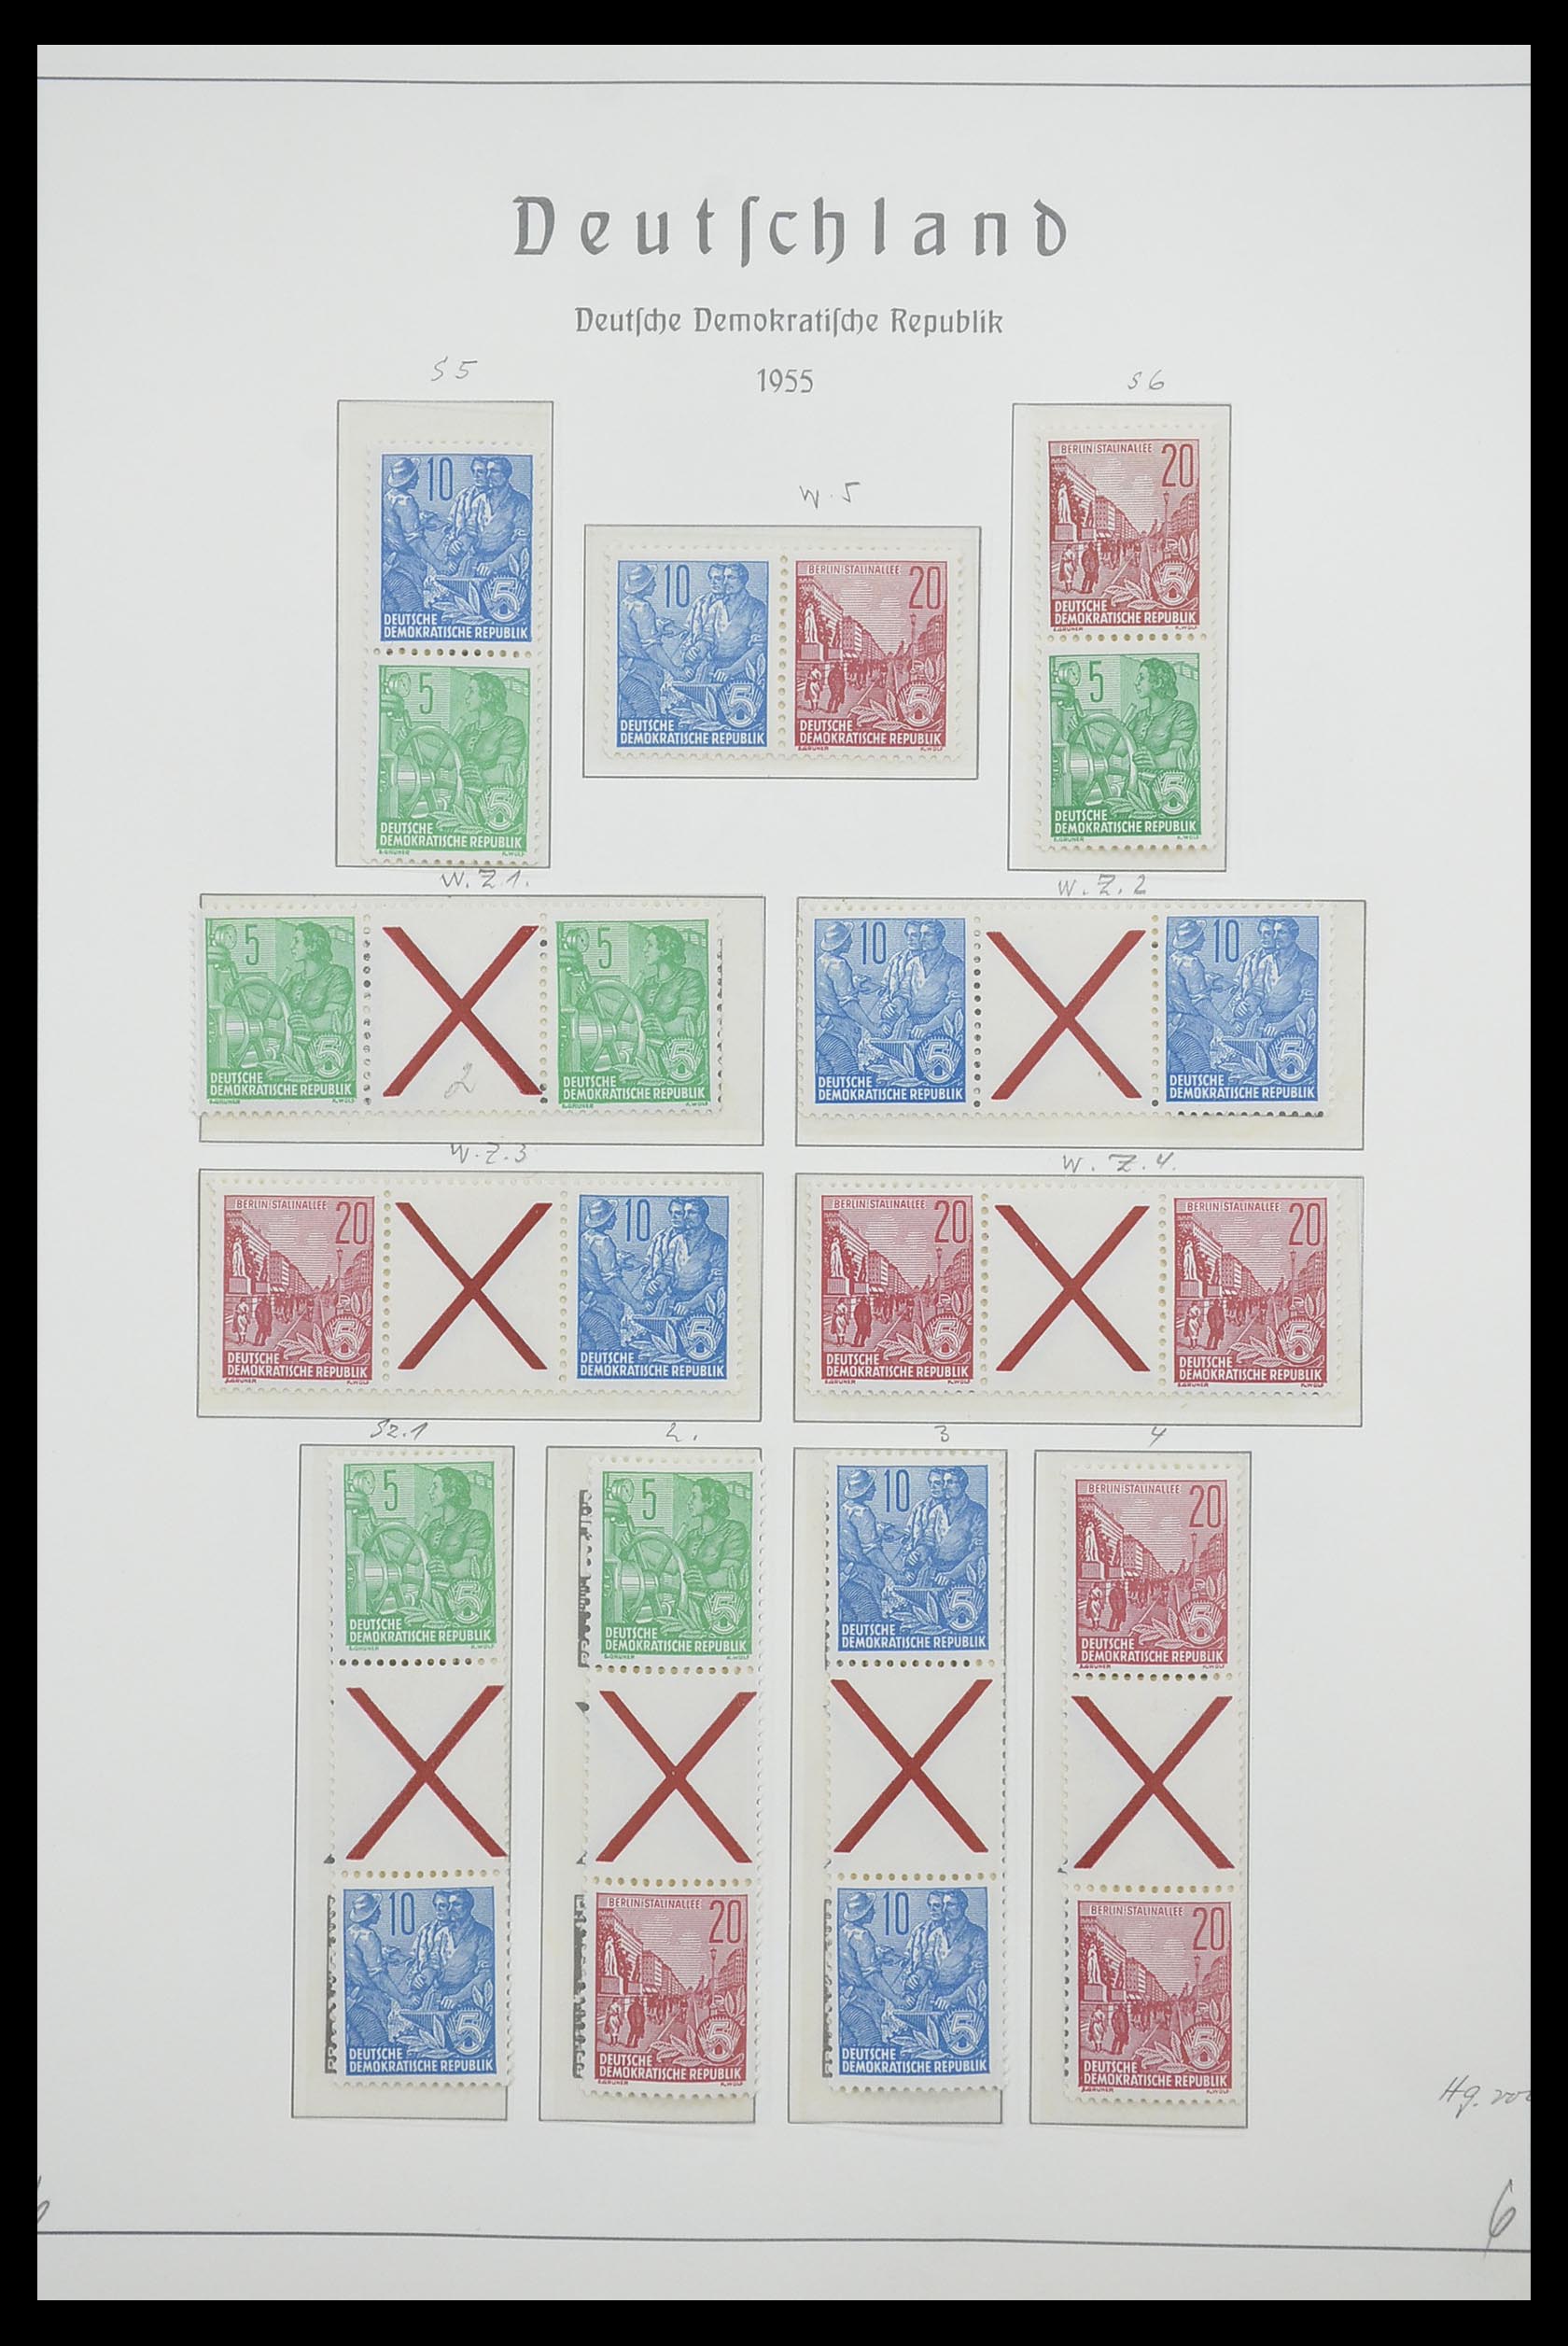 33271 001 - Stamp collection 33271 DDR combinations 1955-1990.